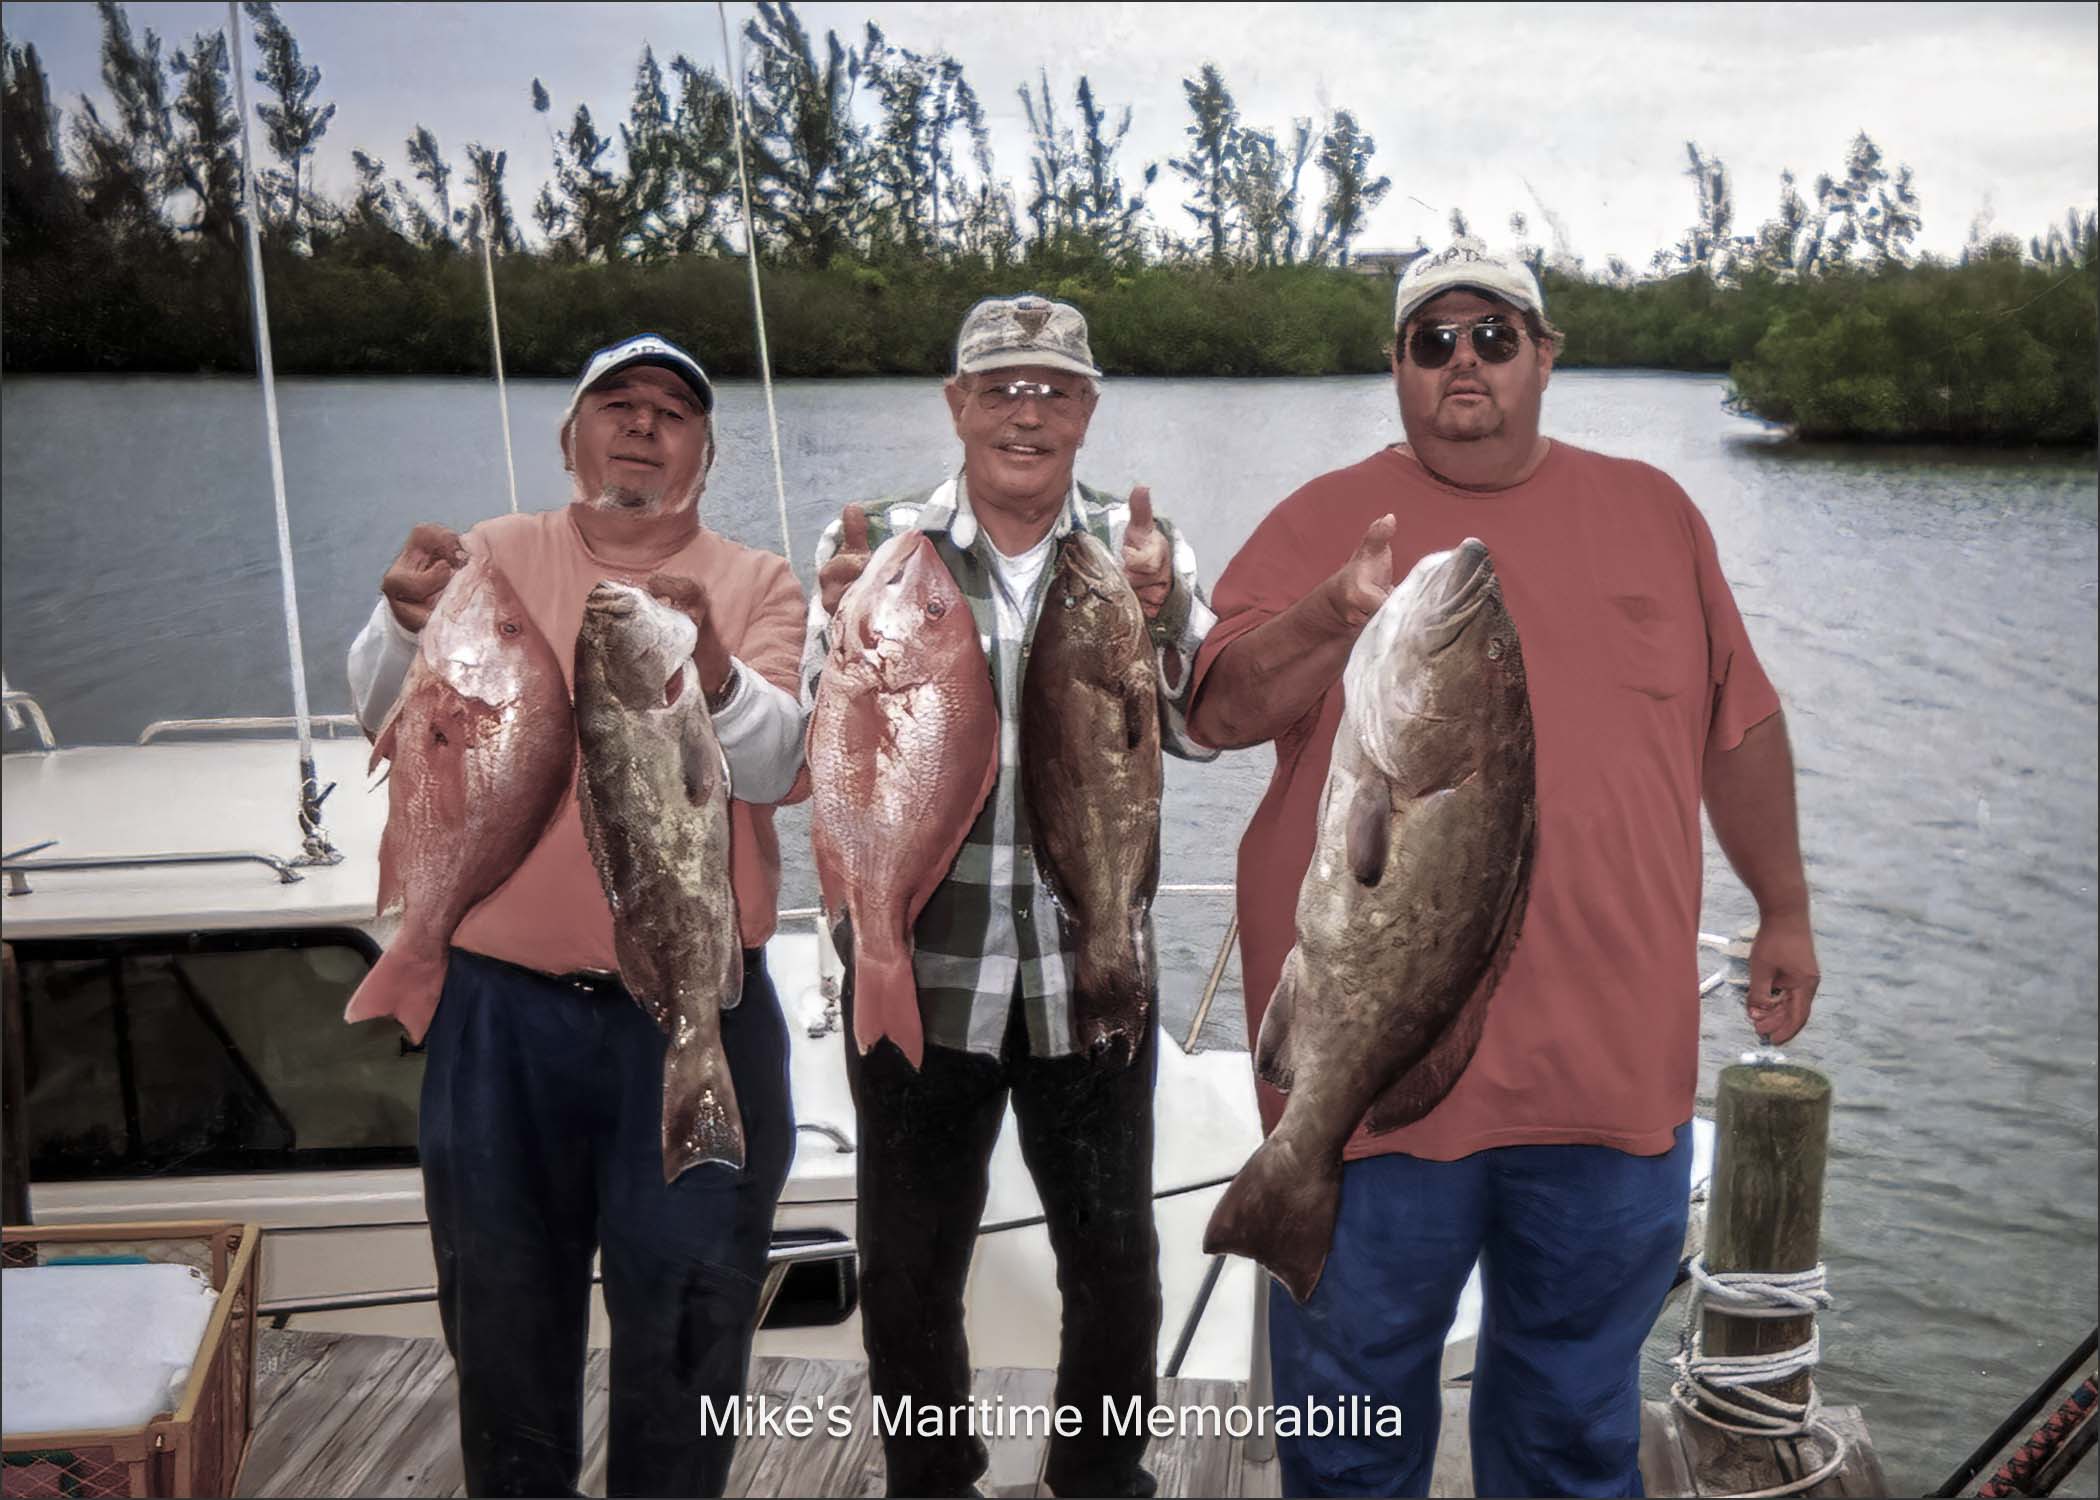 Captain Mickey fishing in Florida Captain Mickey with a Snapper and a Grouper. His friend "Big Jim" is in the middle and Dave Bogan Jr. is on the right. The photo is courtesy of Captain Dave Bogan Sr.